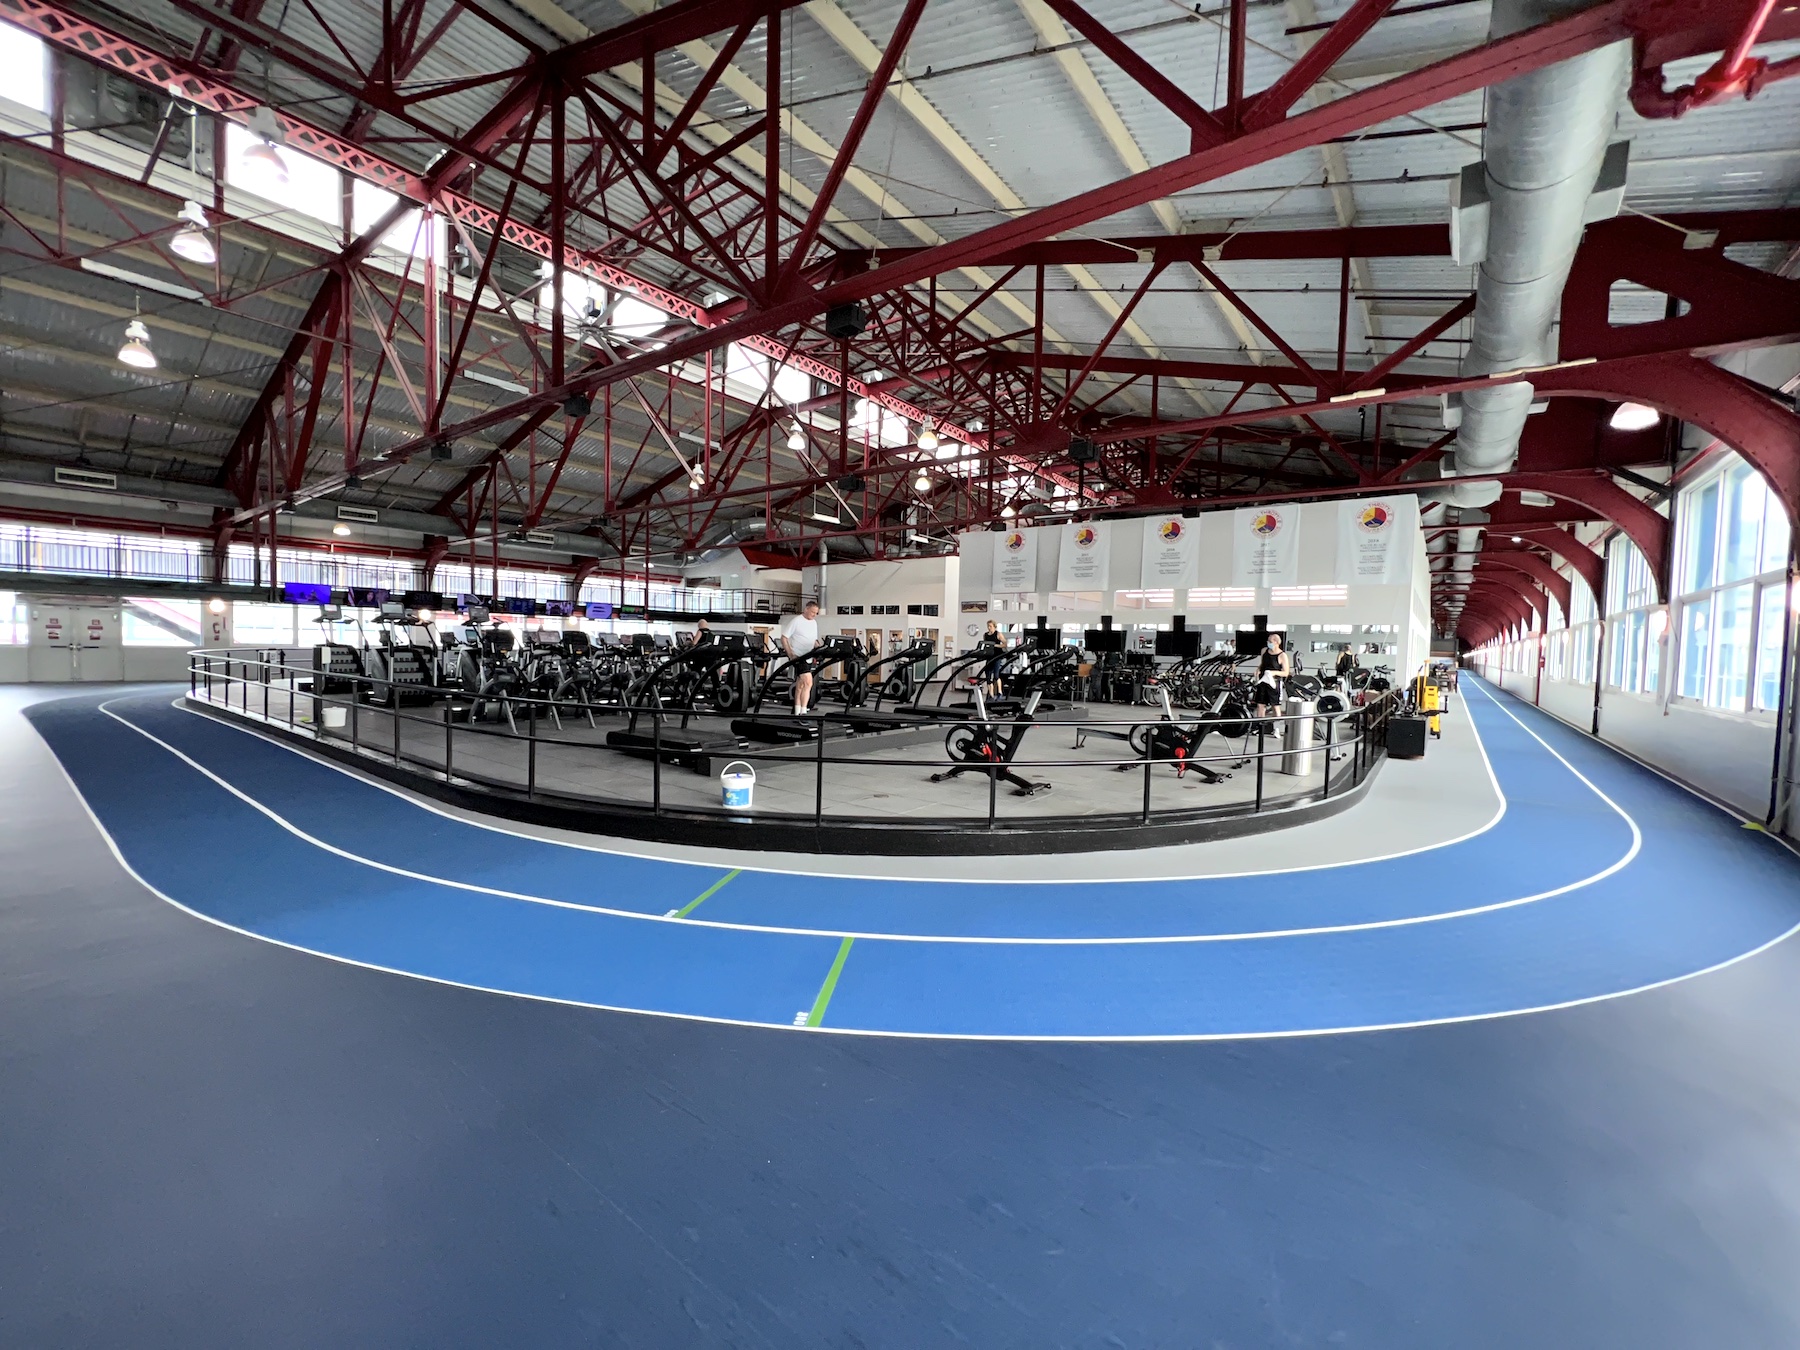 Chelsea Piers Fitness NYC track